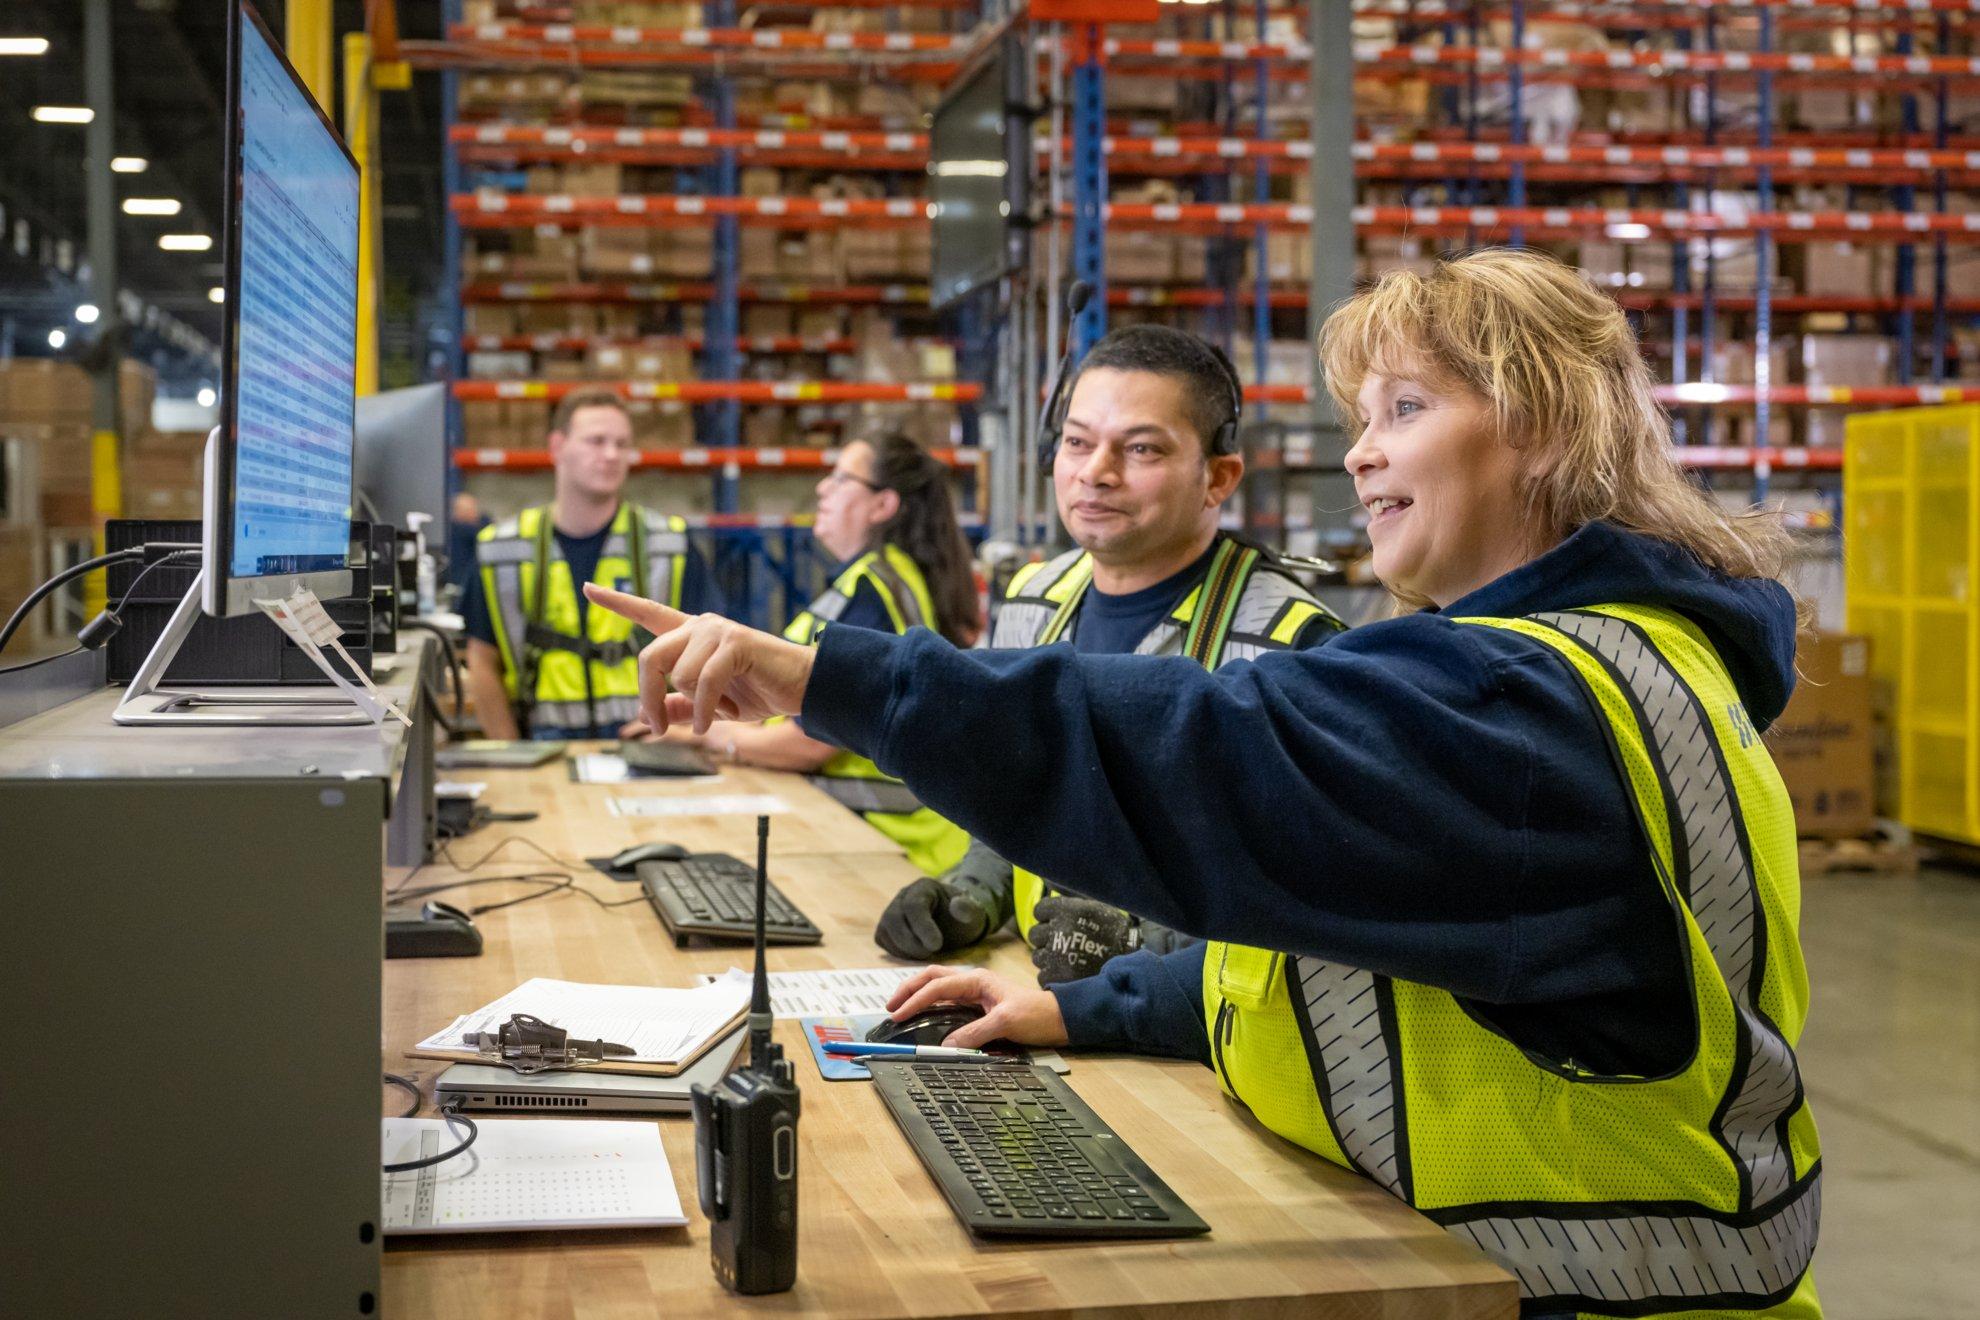 In a Ferguson distribution center, an associate at a desk points to something on her computer screen for another associate.